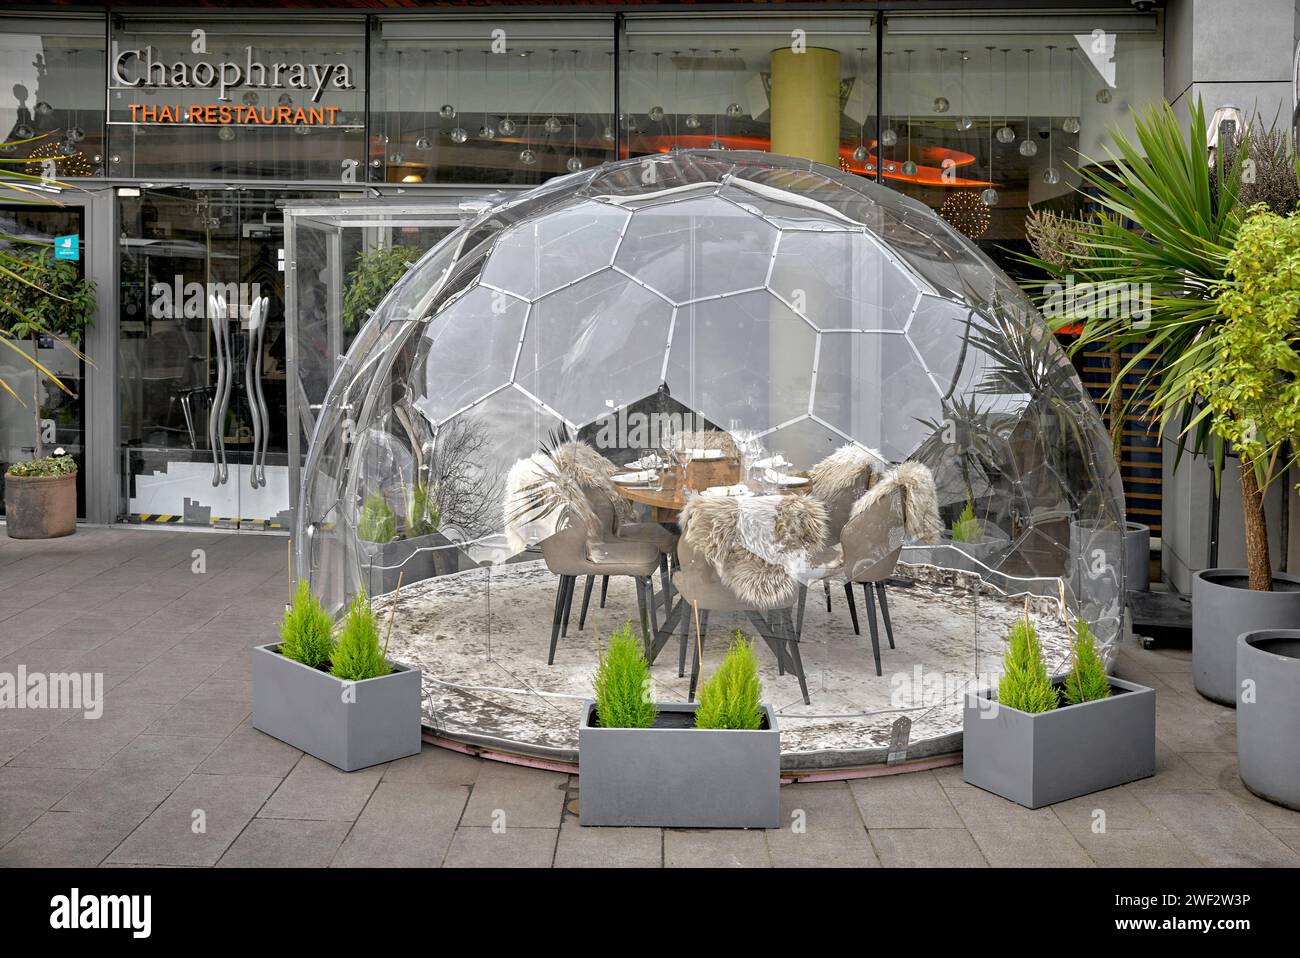 Dining dome for warm outdoor dining at the Chaophraya Thai restaurant Birmingham England UK Stock Photo